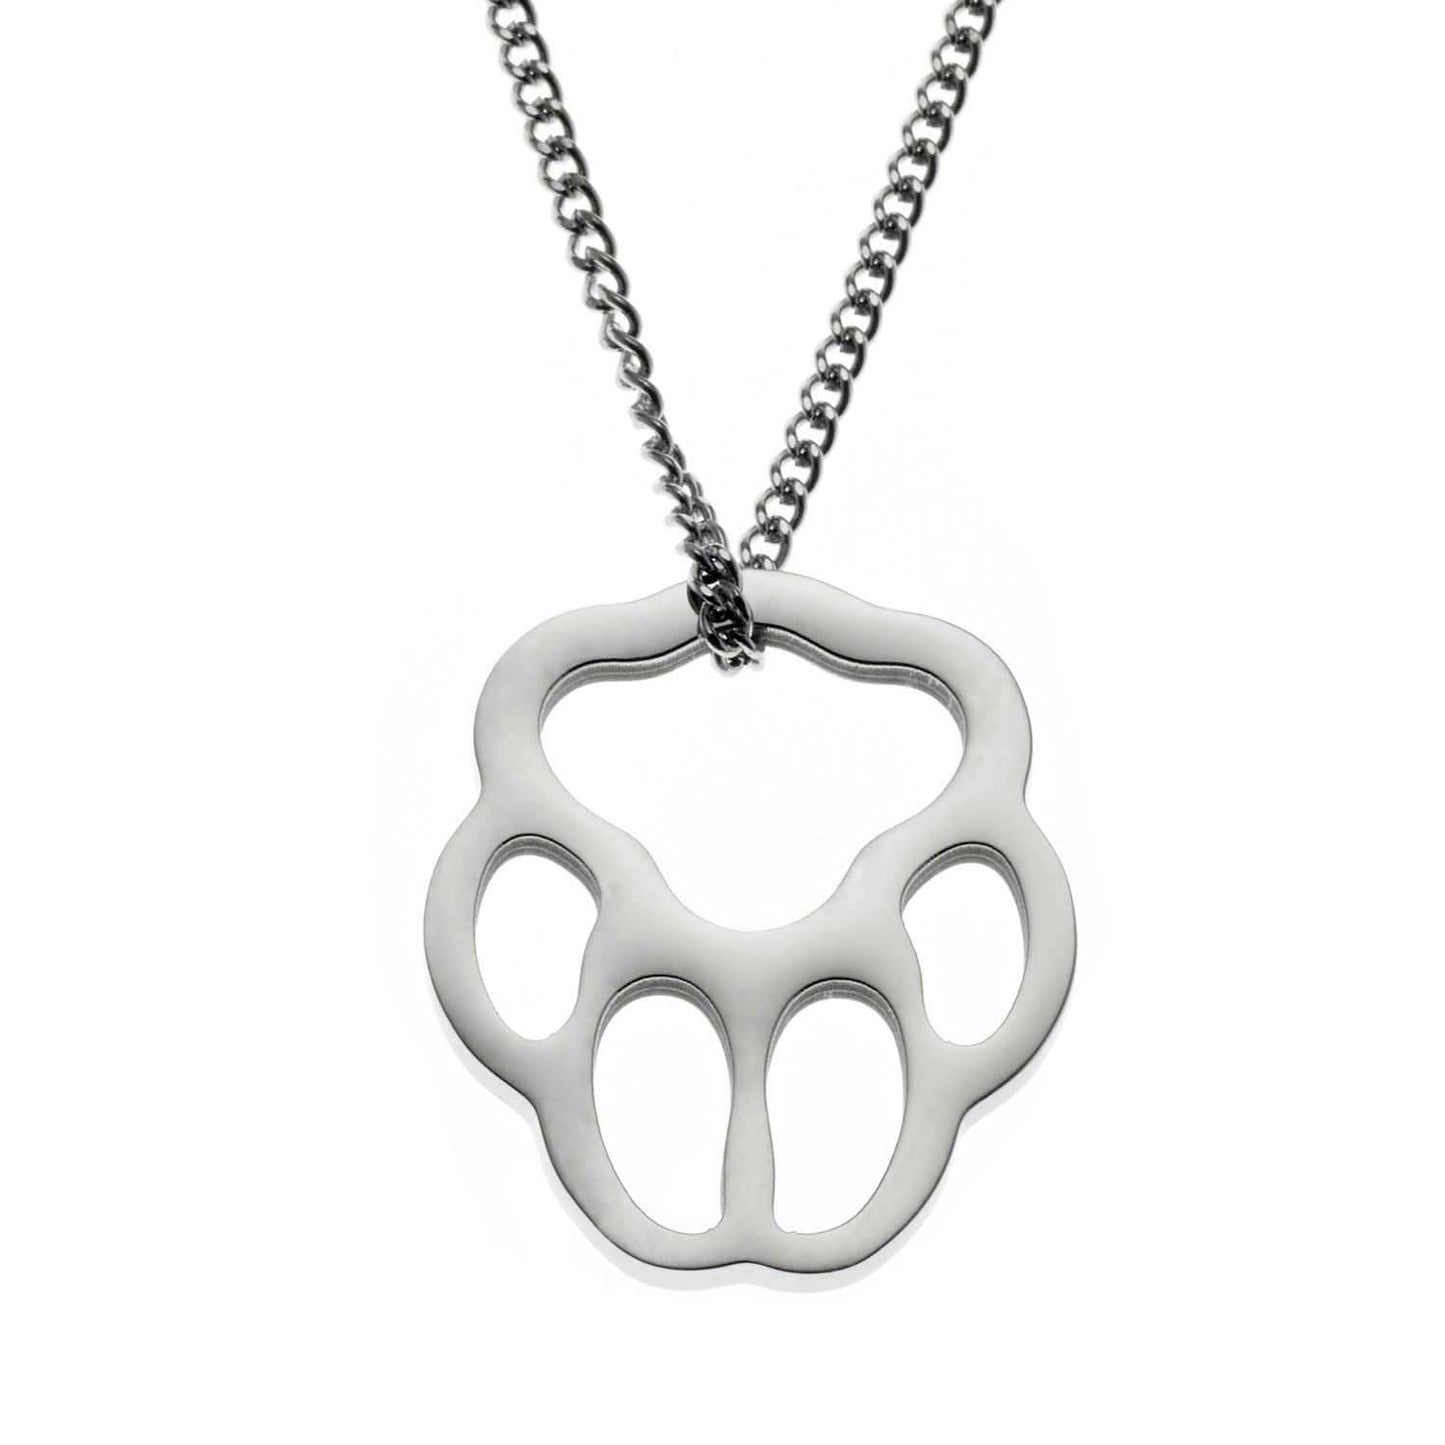 Stainless Steel Small Open Paw Print Pendant Necklace - Pet Memorial Jewelry Gift